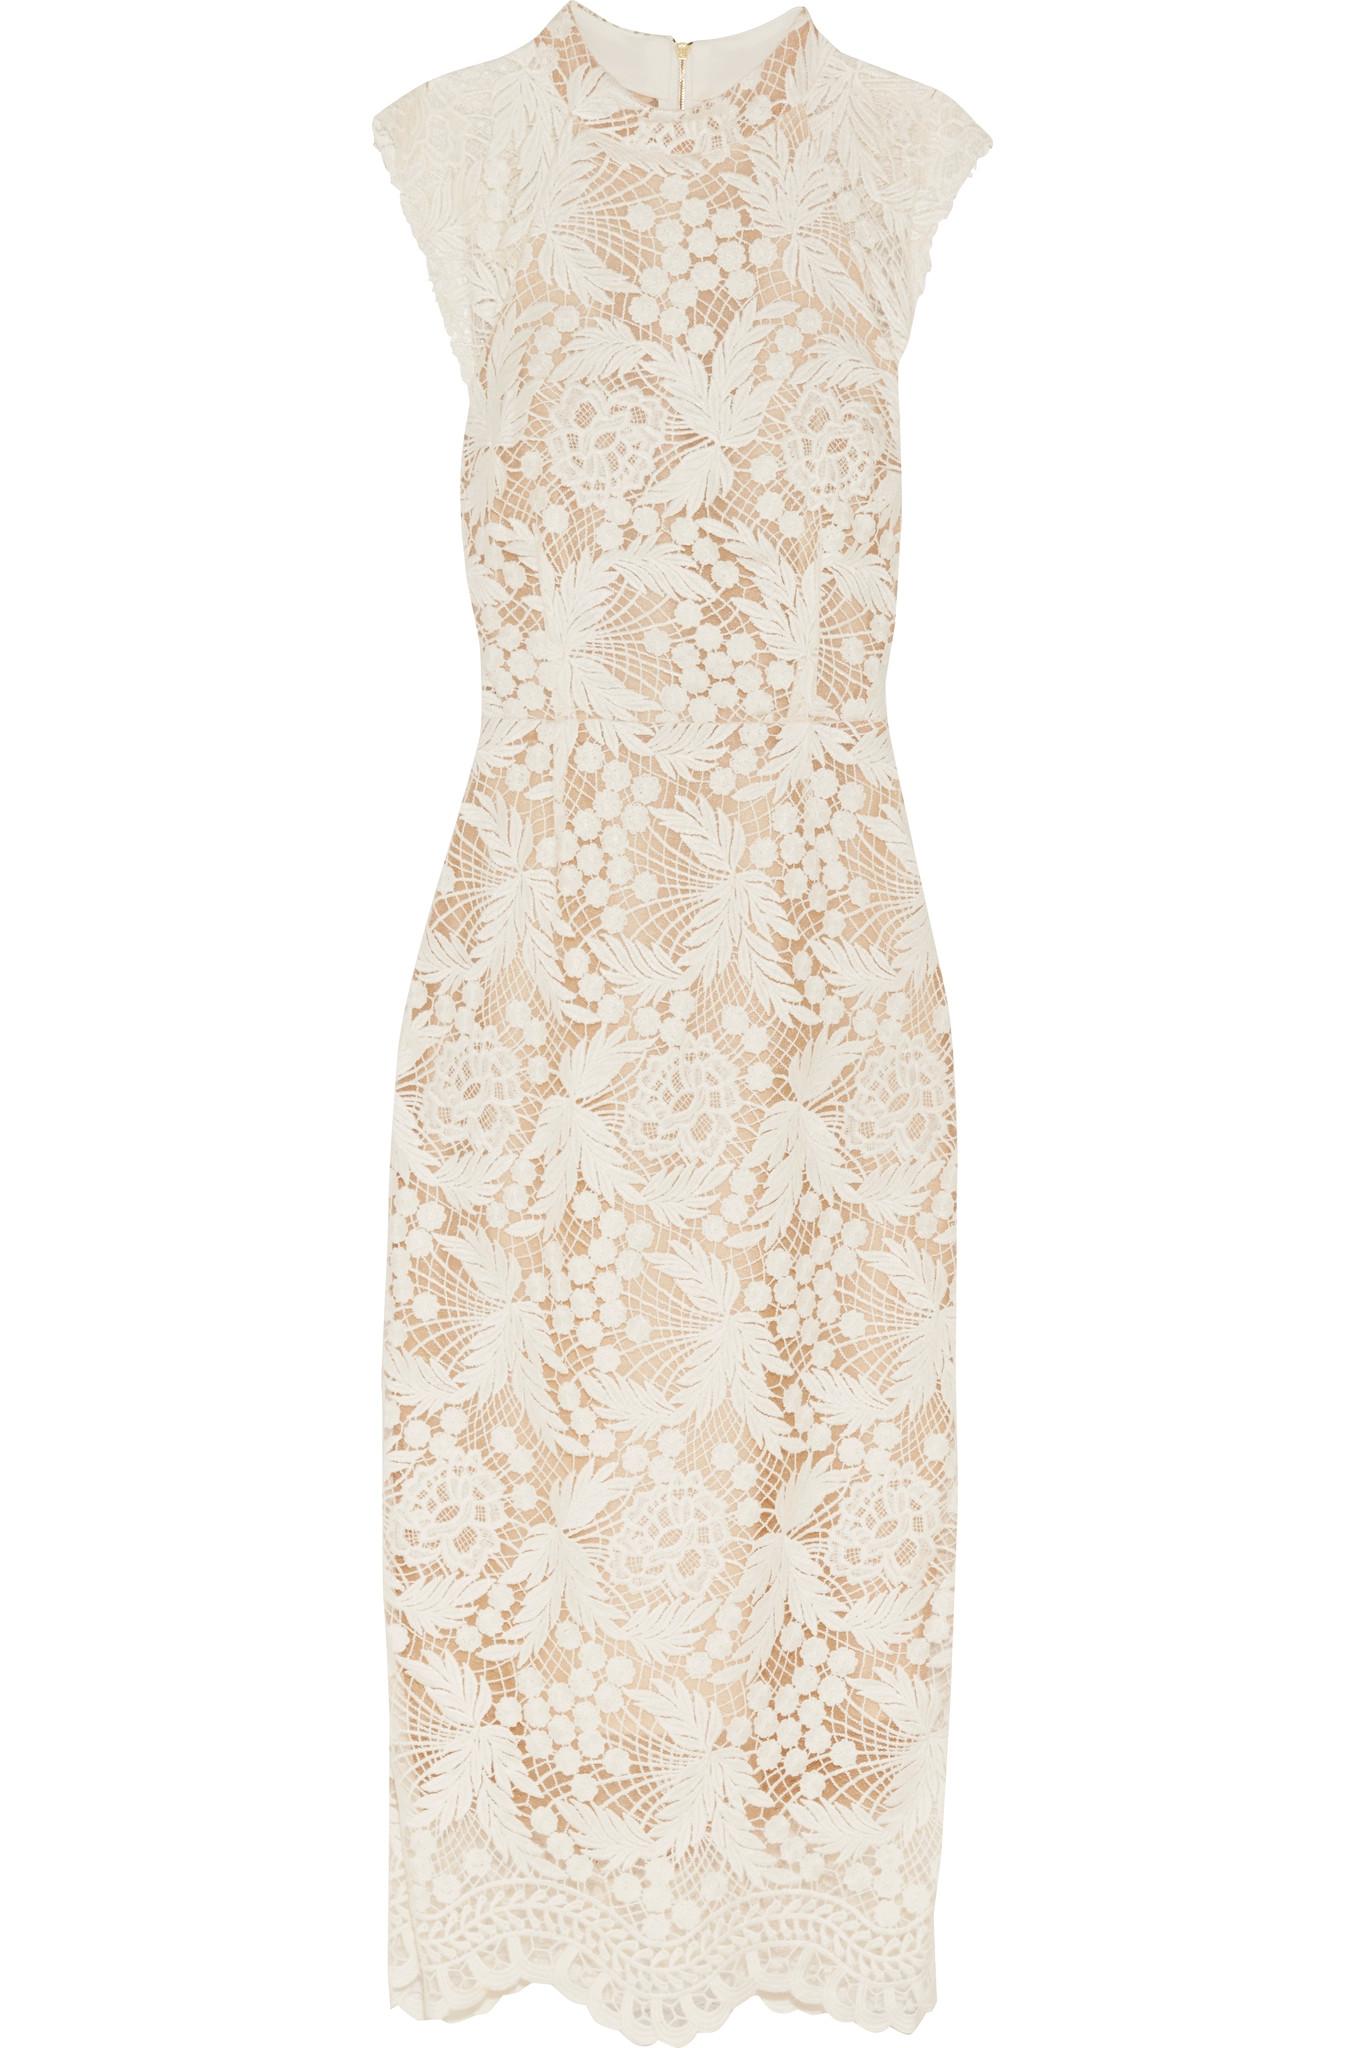 Lyst - Rebecca Vallance The Society Guipure Lace Dress in White